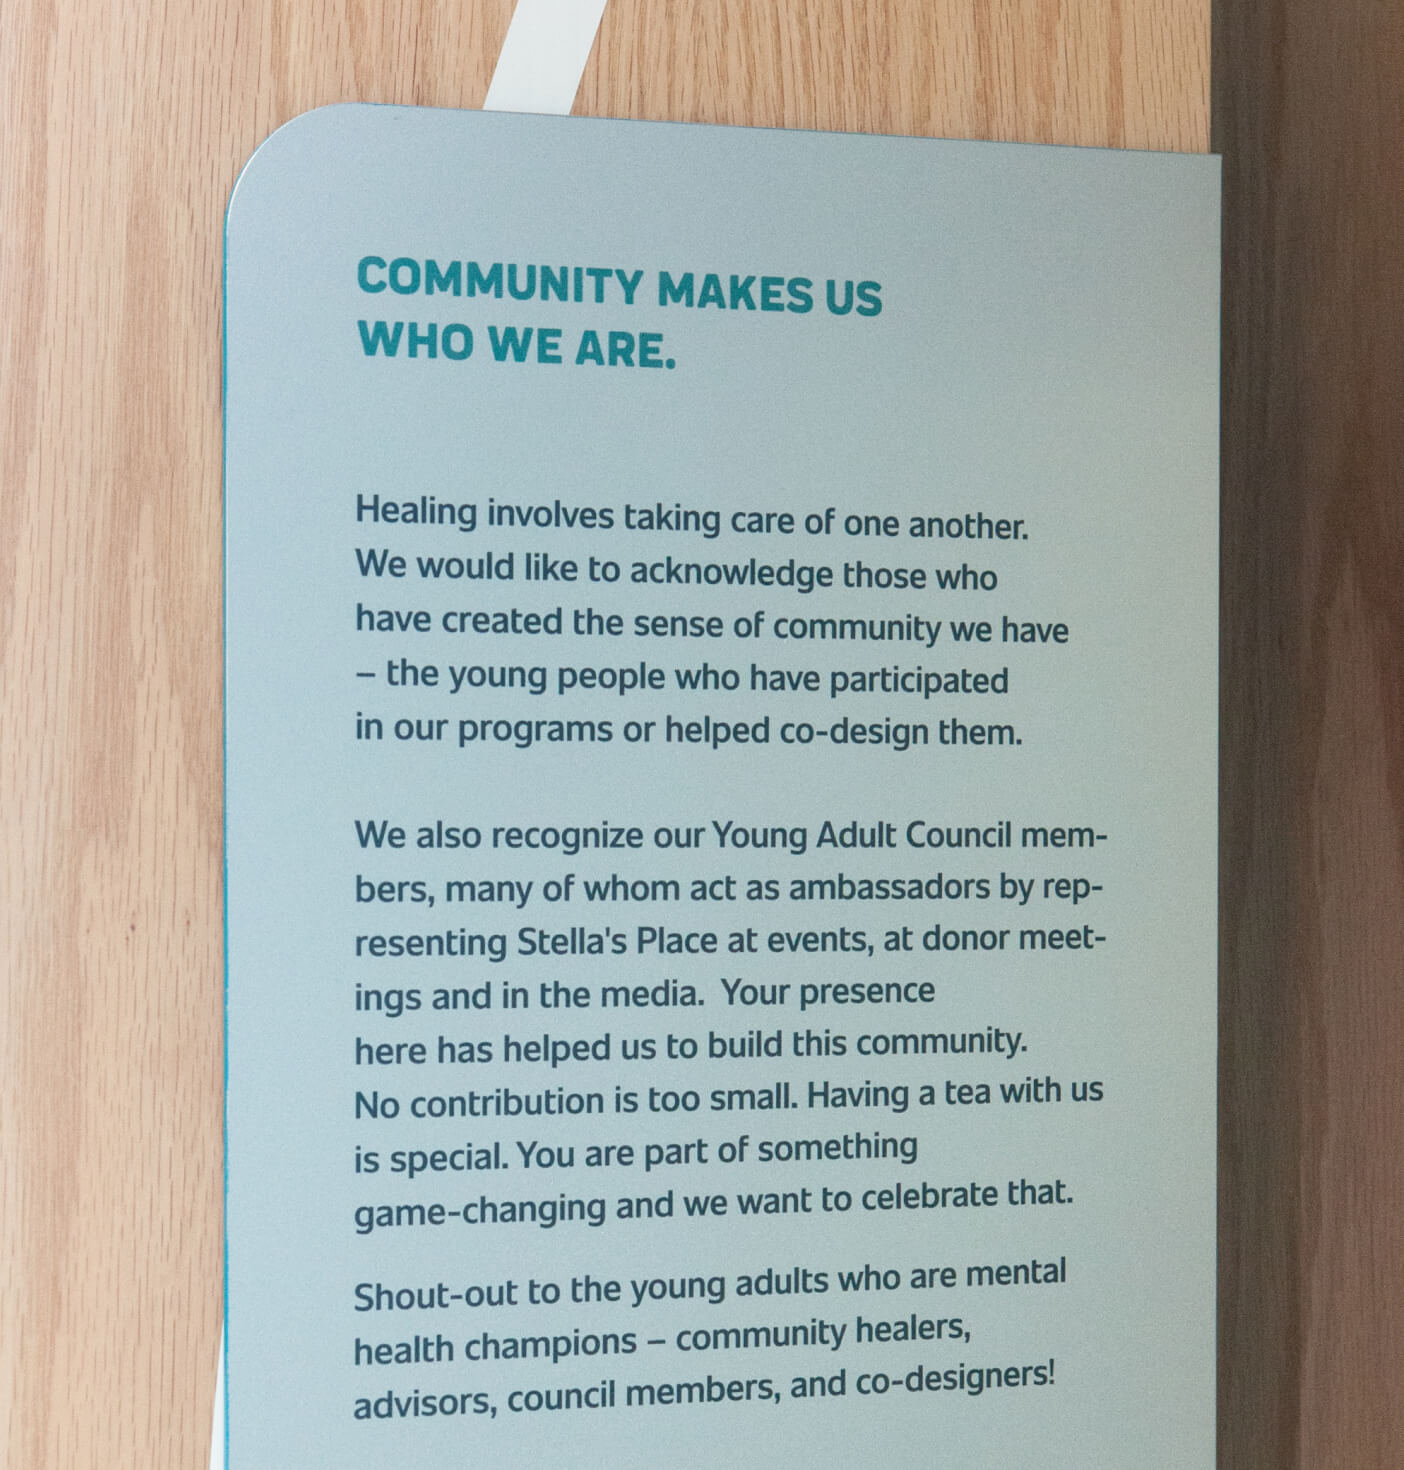 A close-up of a sign describing the community at Stella's Place.